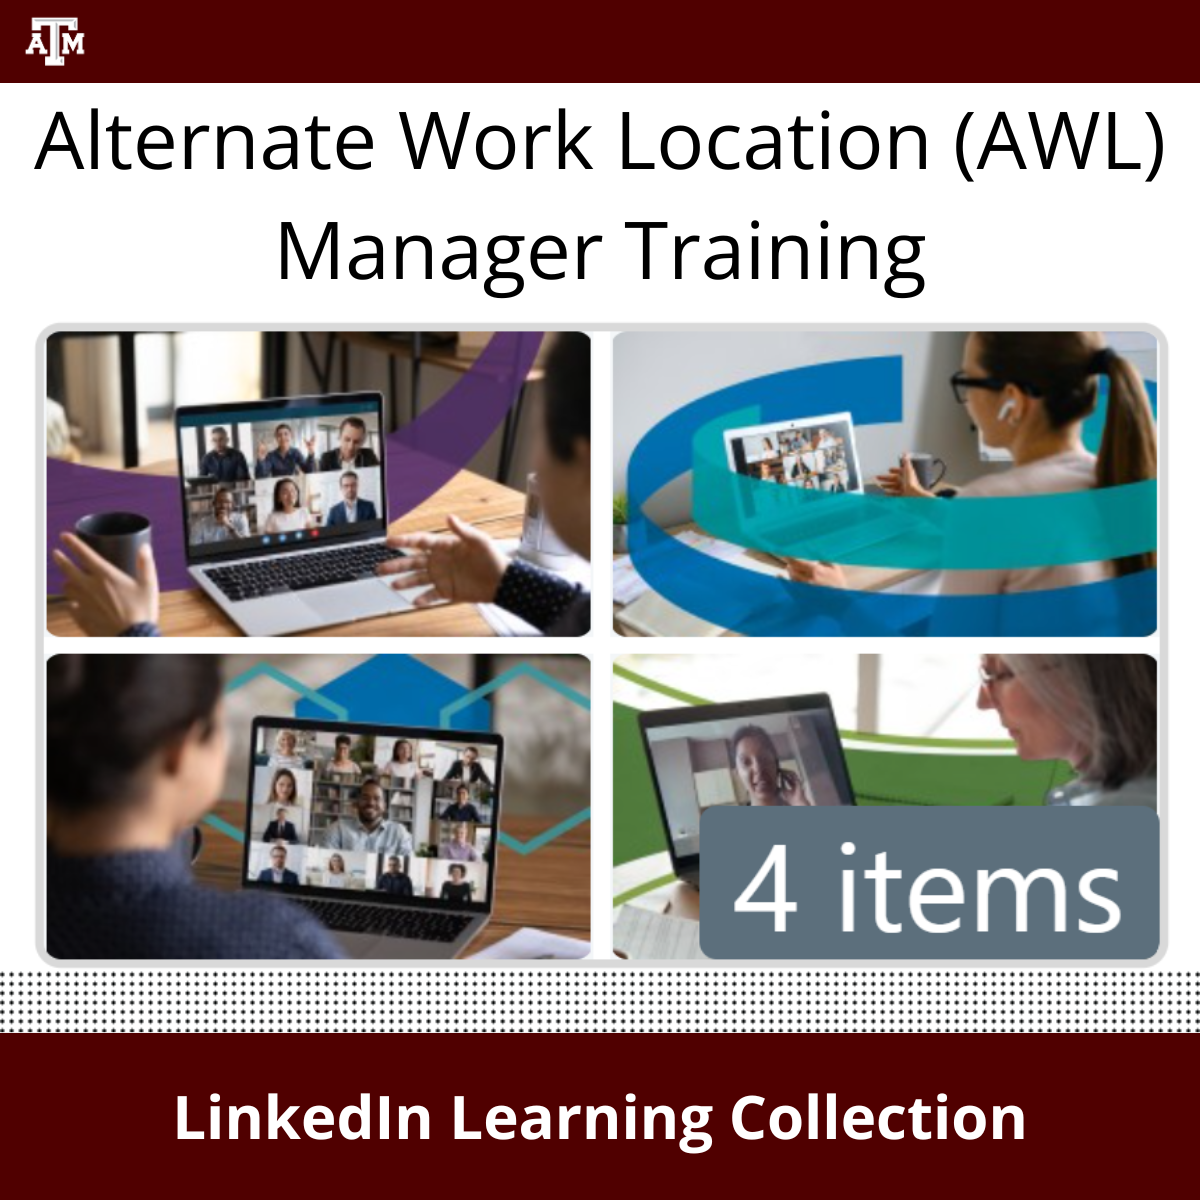 Alternate Work Location - Manager - LinkedIn Learning Collection